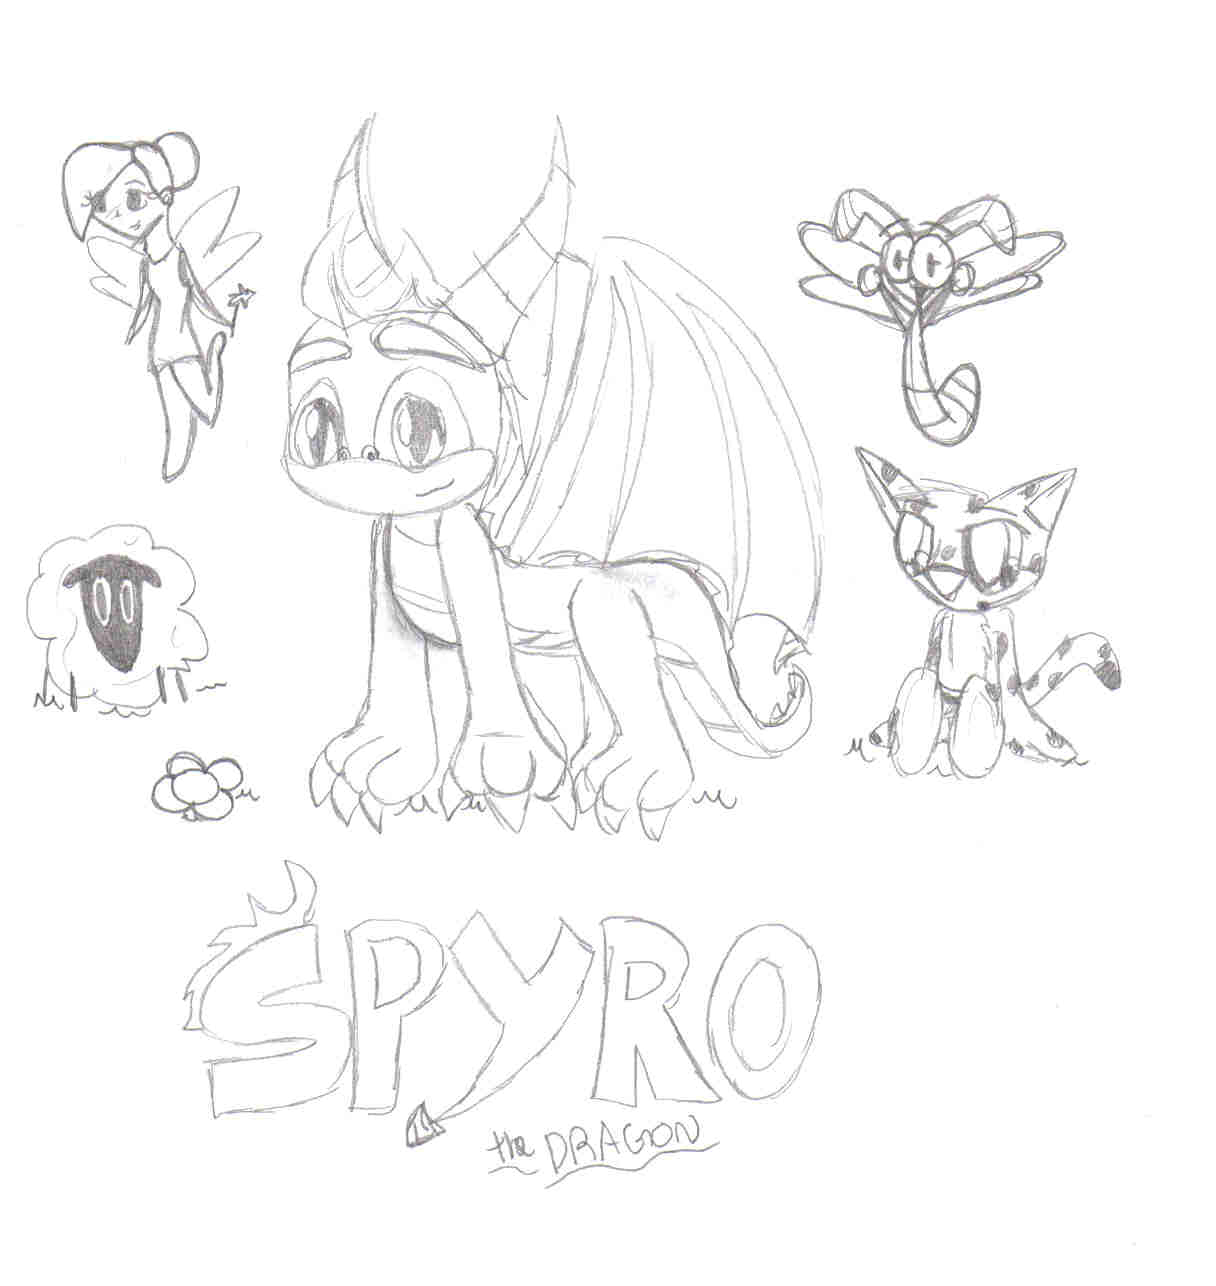 It's Spyro and...those guys by orchid